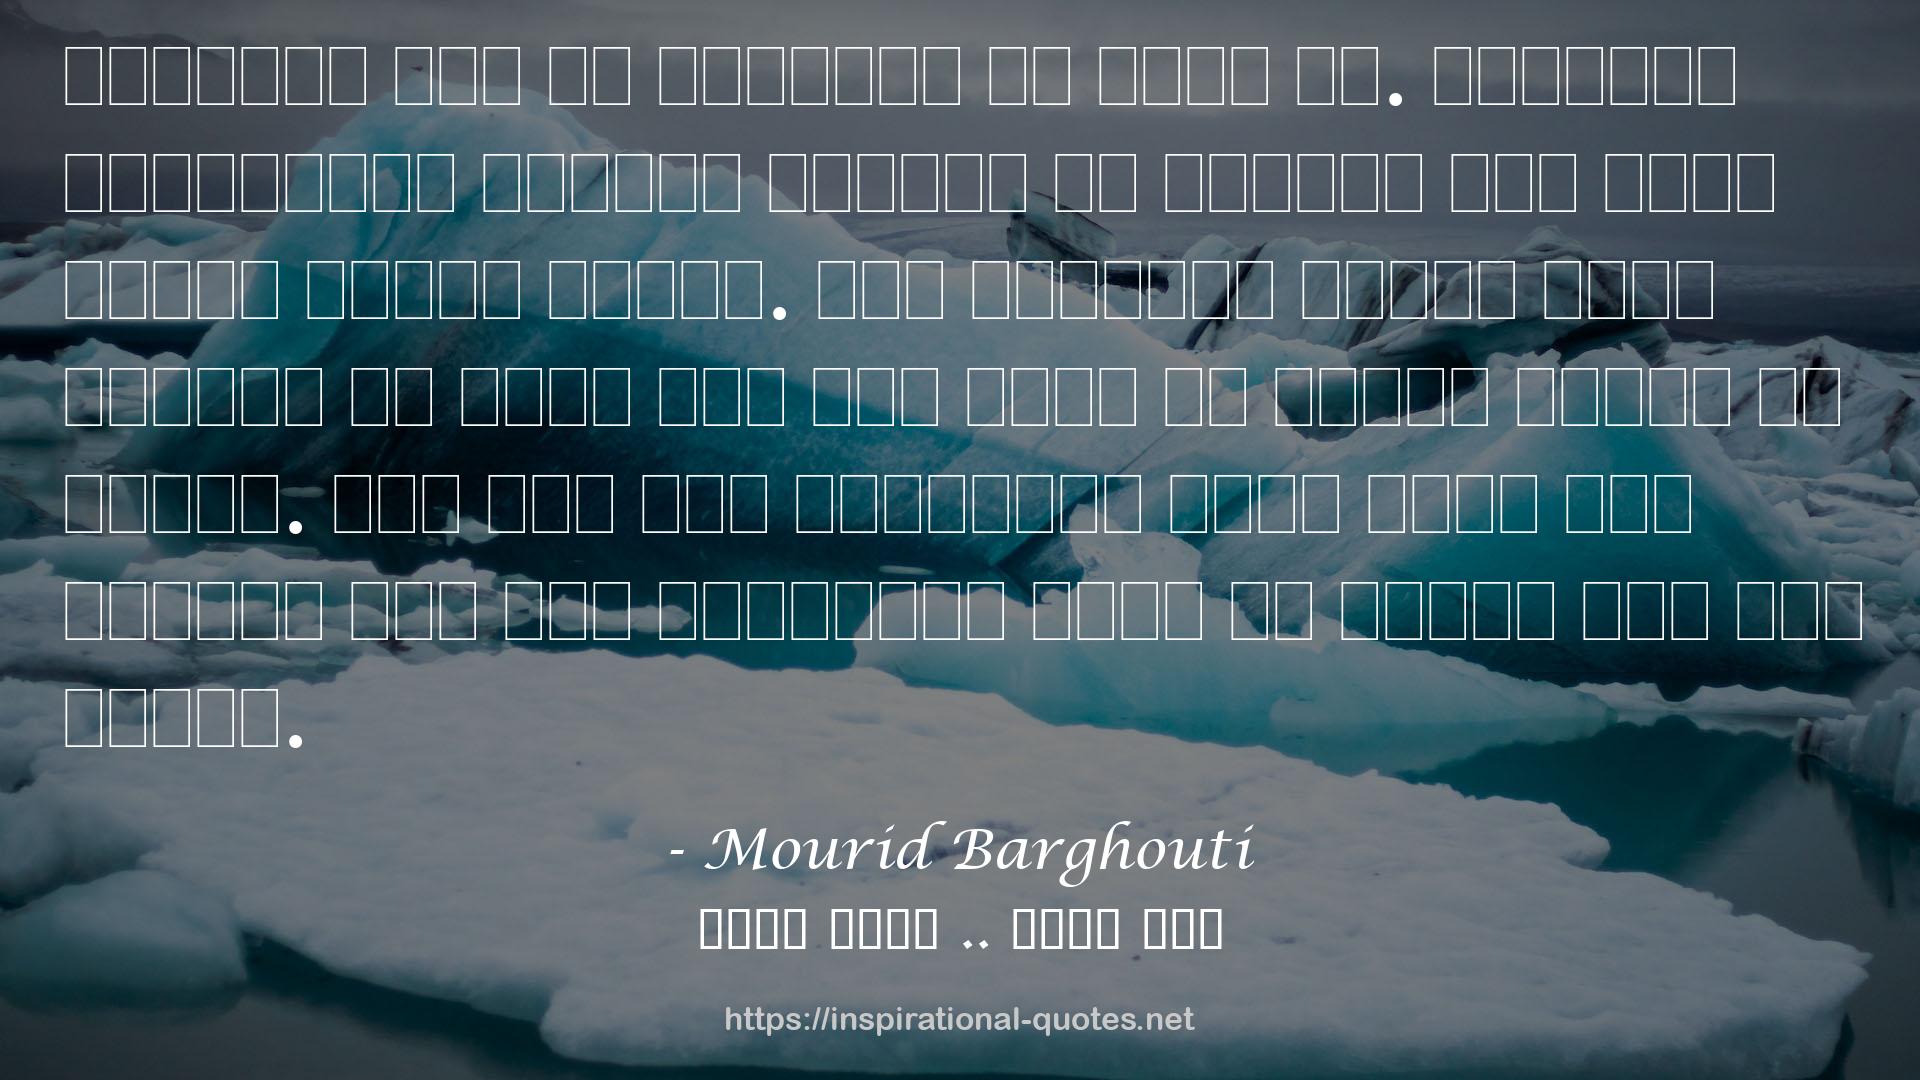 Mourid Barghouti QUOTES